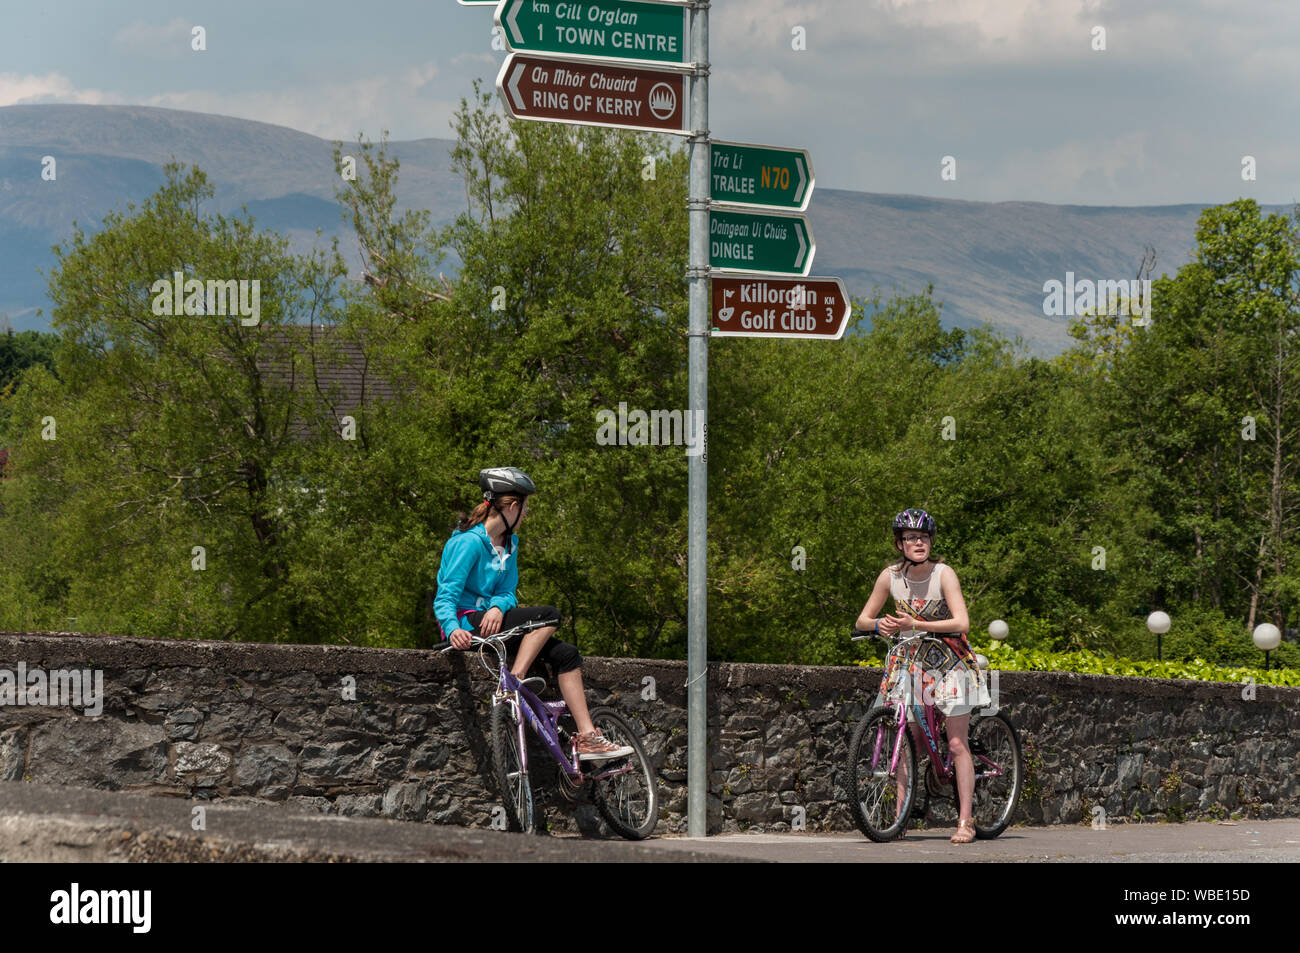 Two 2 young women tourists with bicycles wondering about the direction at a road junction. Road signs in English and Irish language writing. Stock Photo